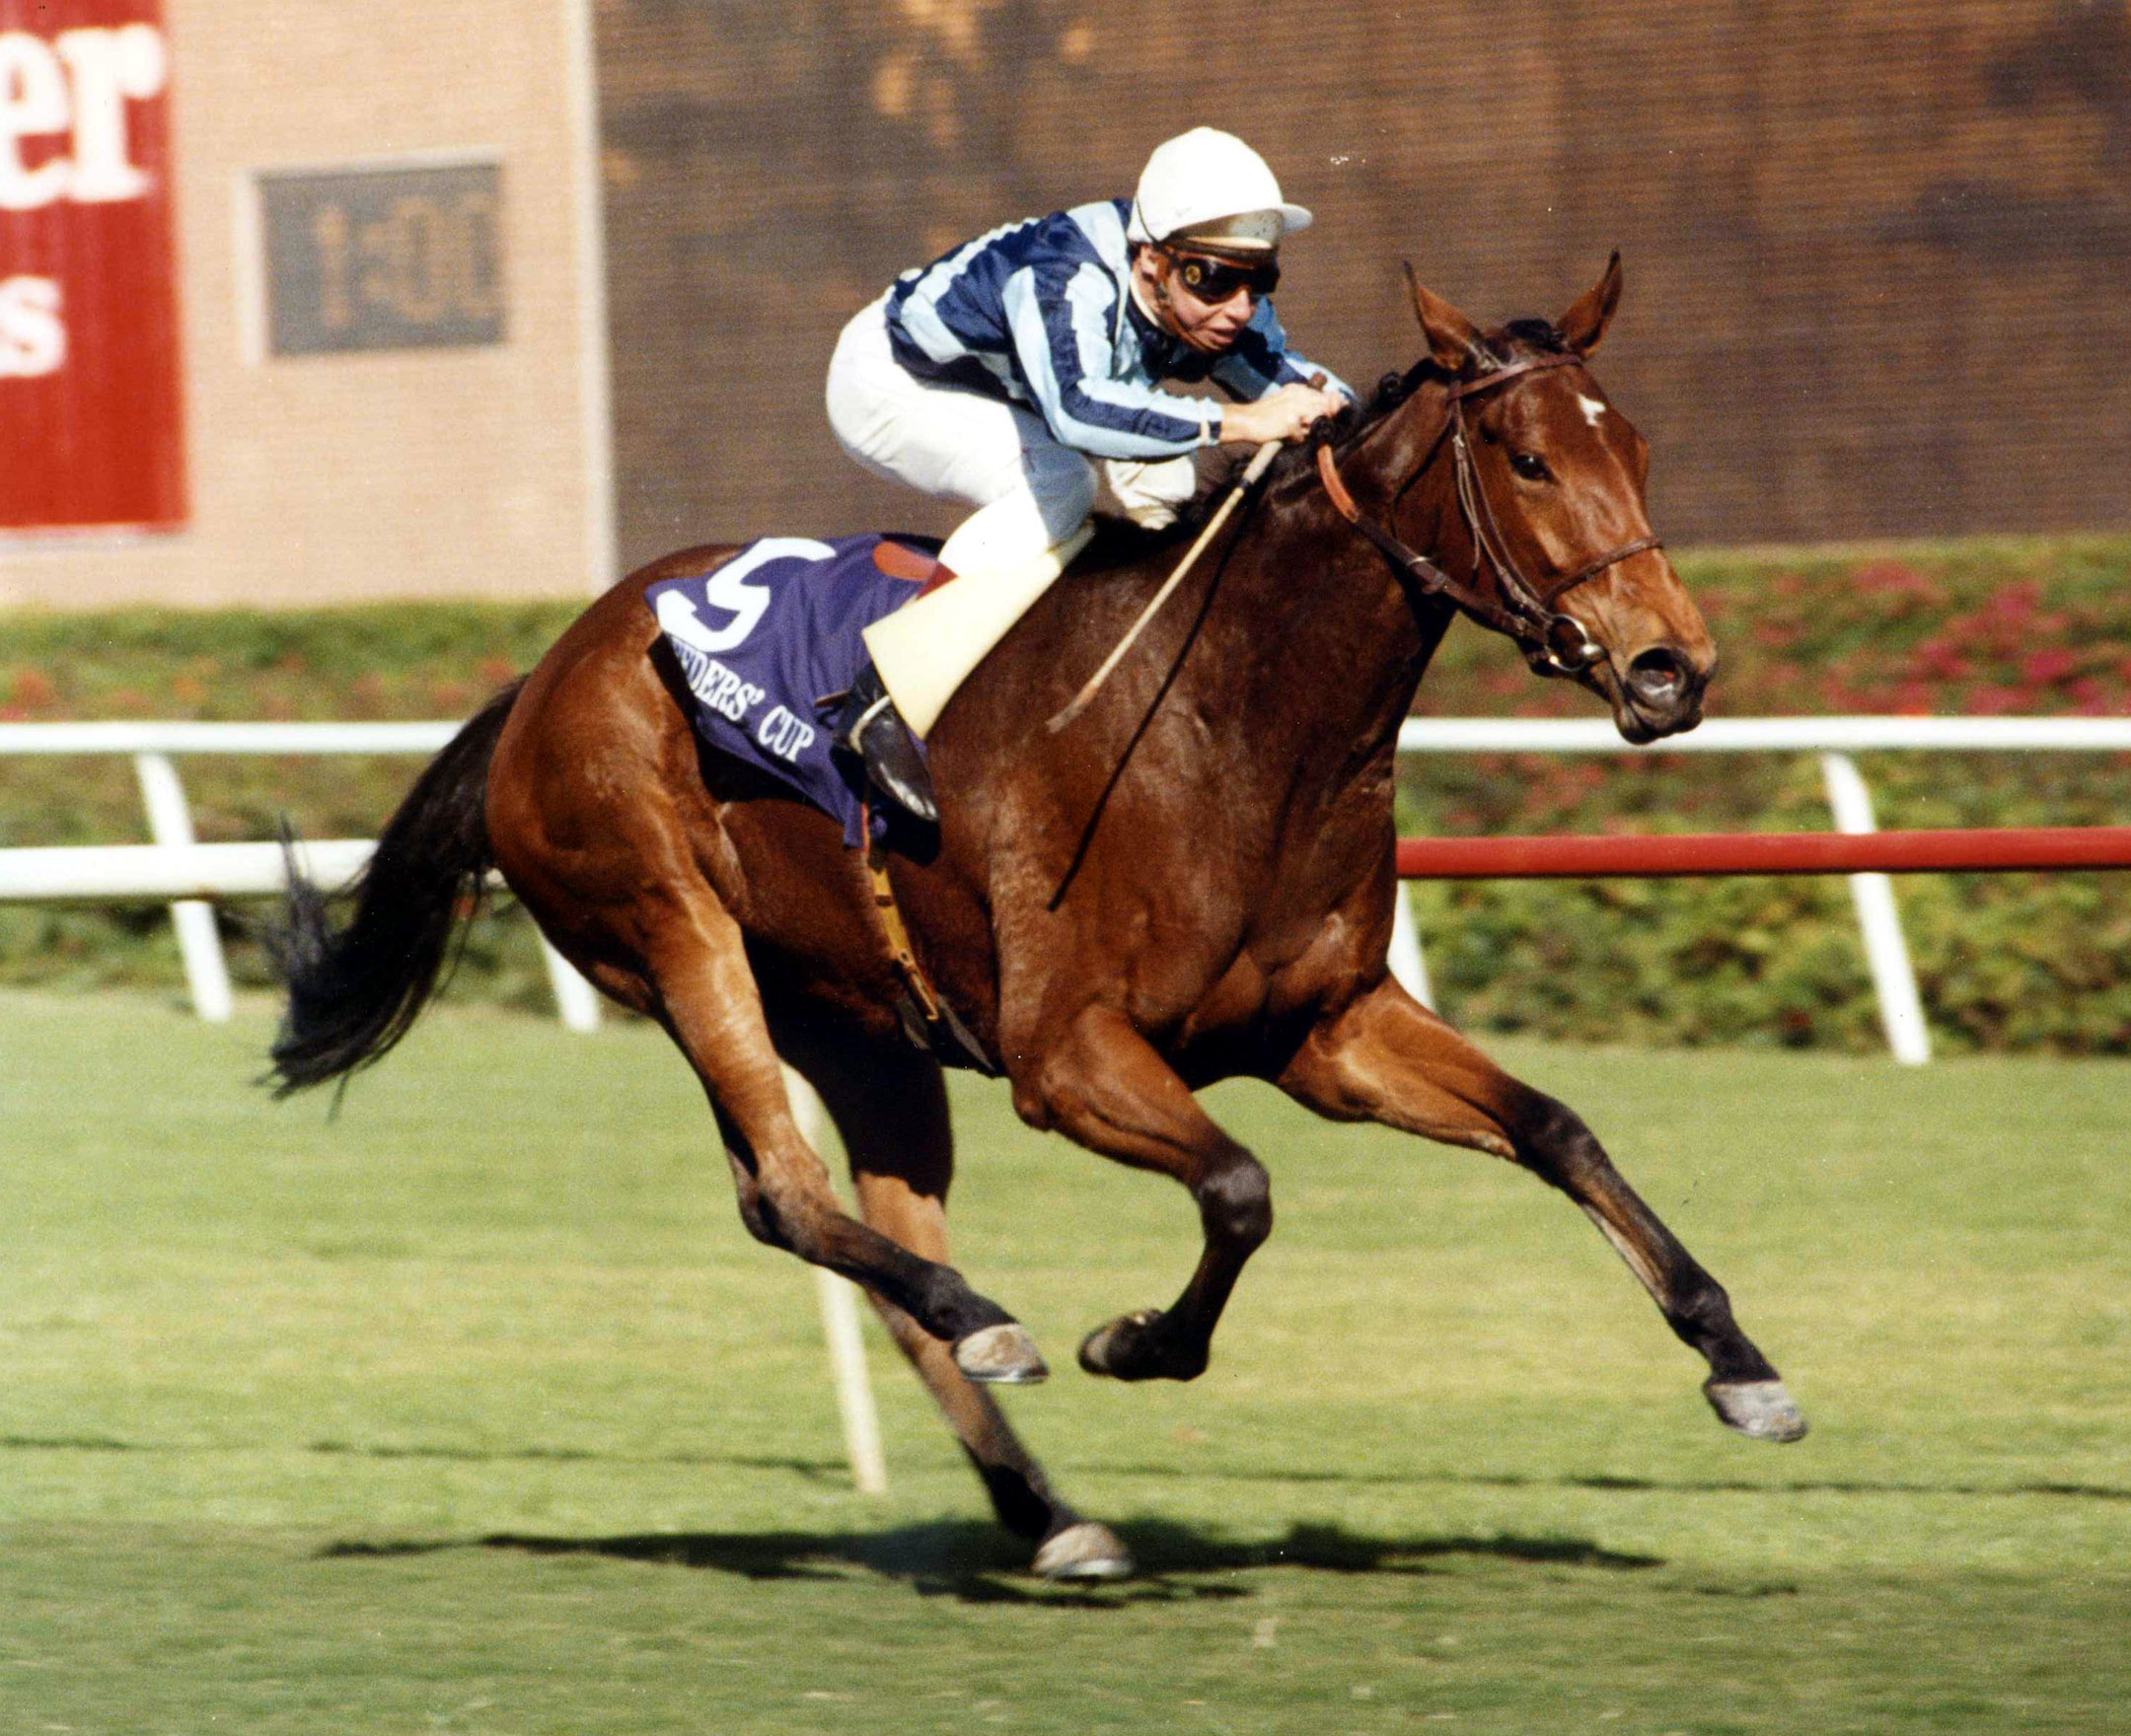 Miesque winning the 1987 Breeders' Cup Mile at Hollywood Park (Hollywood Park Photo/Museum Collection)